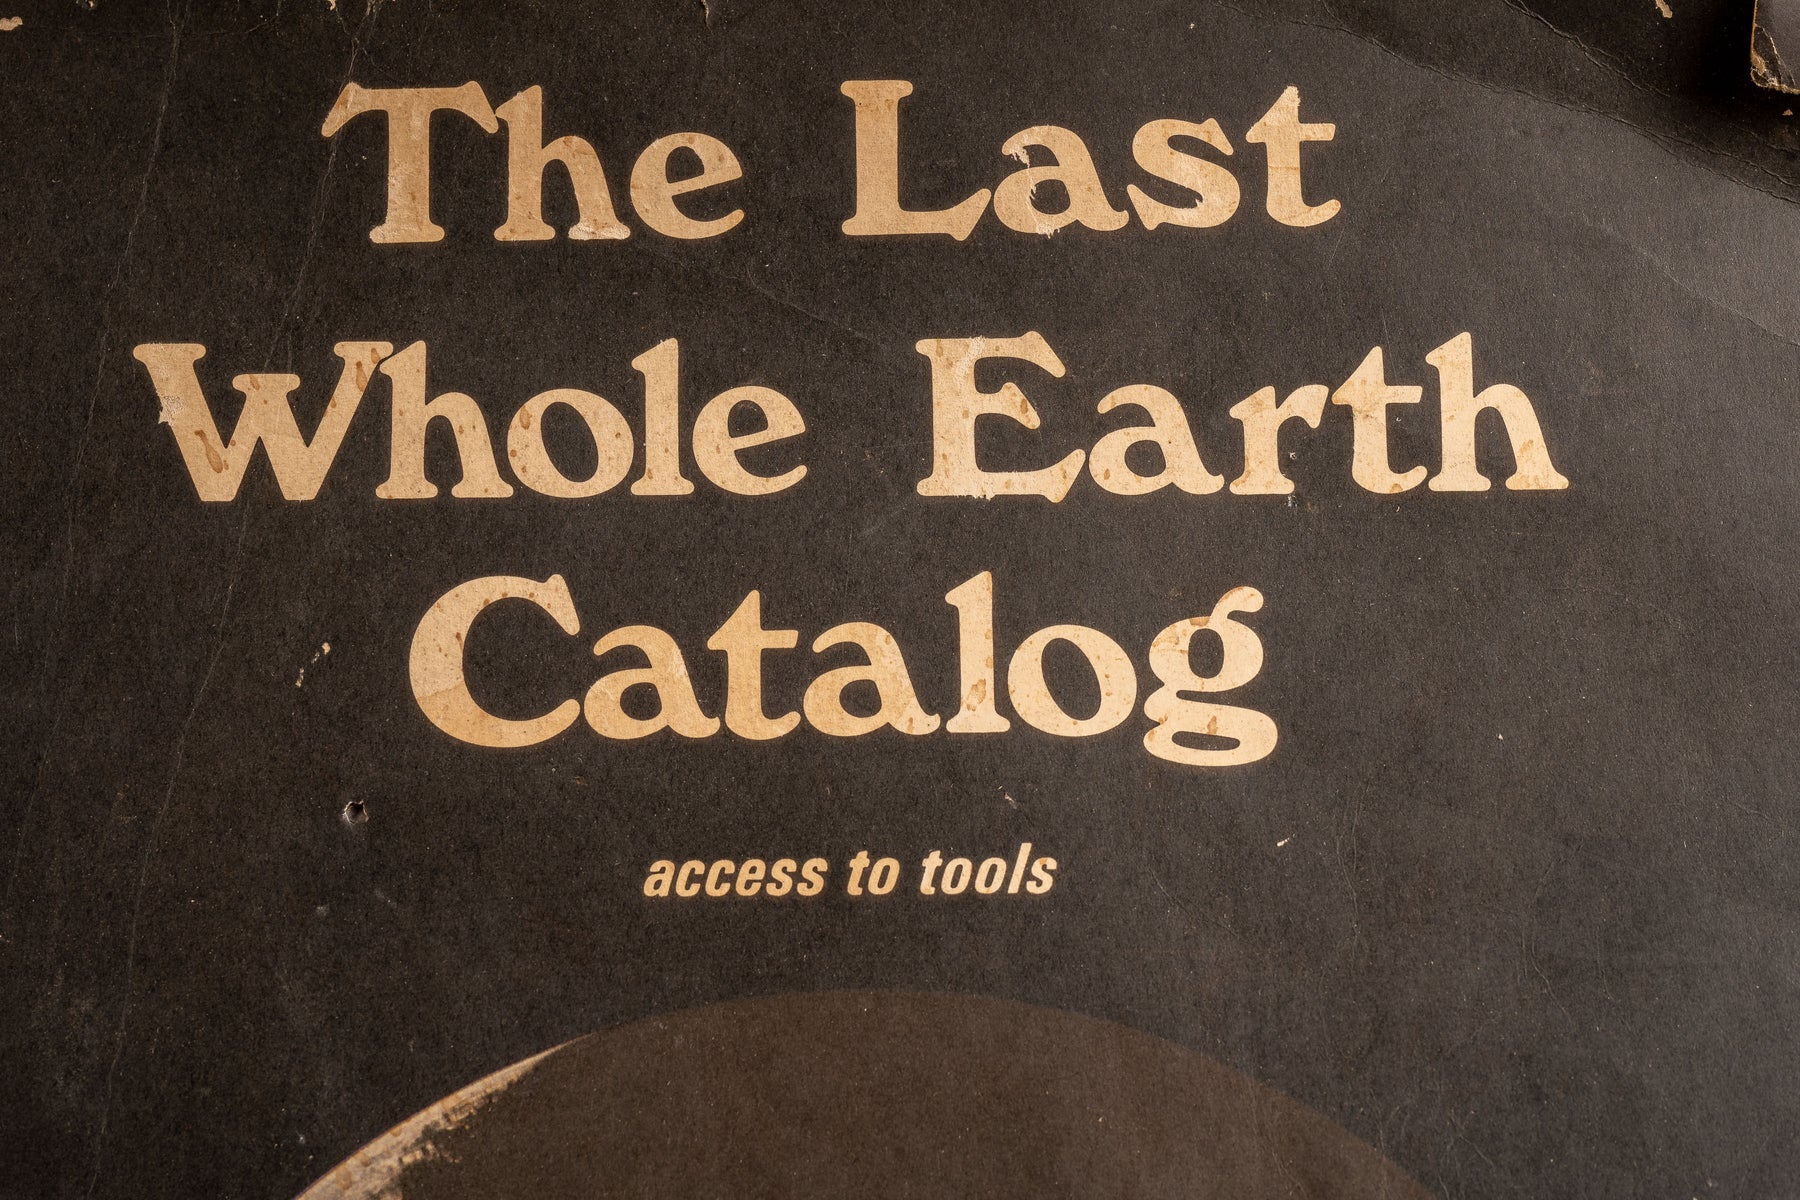 c. 1971 Last Whole Earth Catalog / A Separate Reality – Industrial